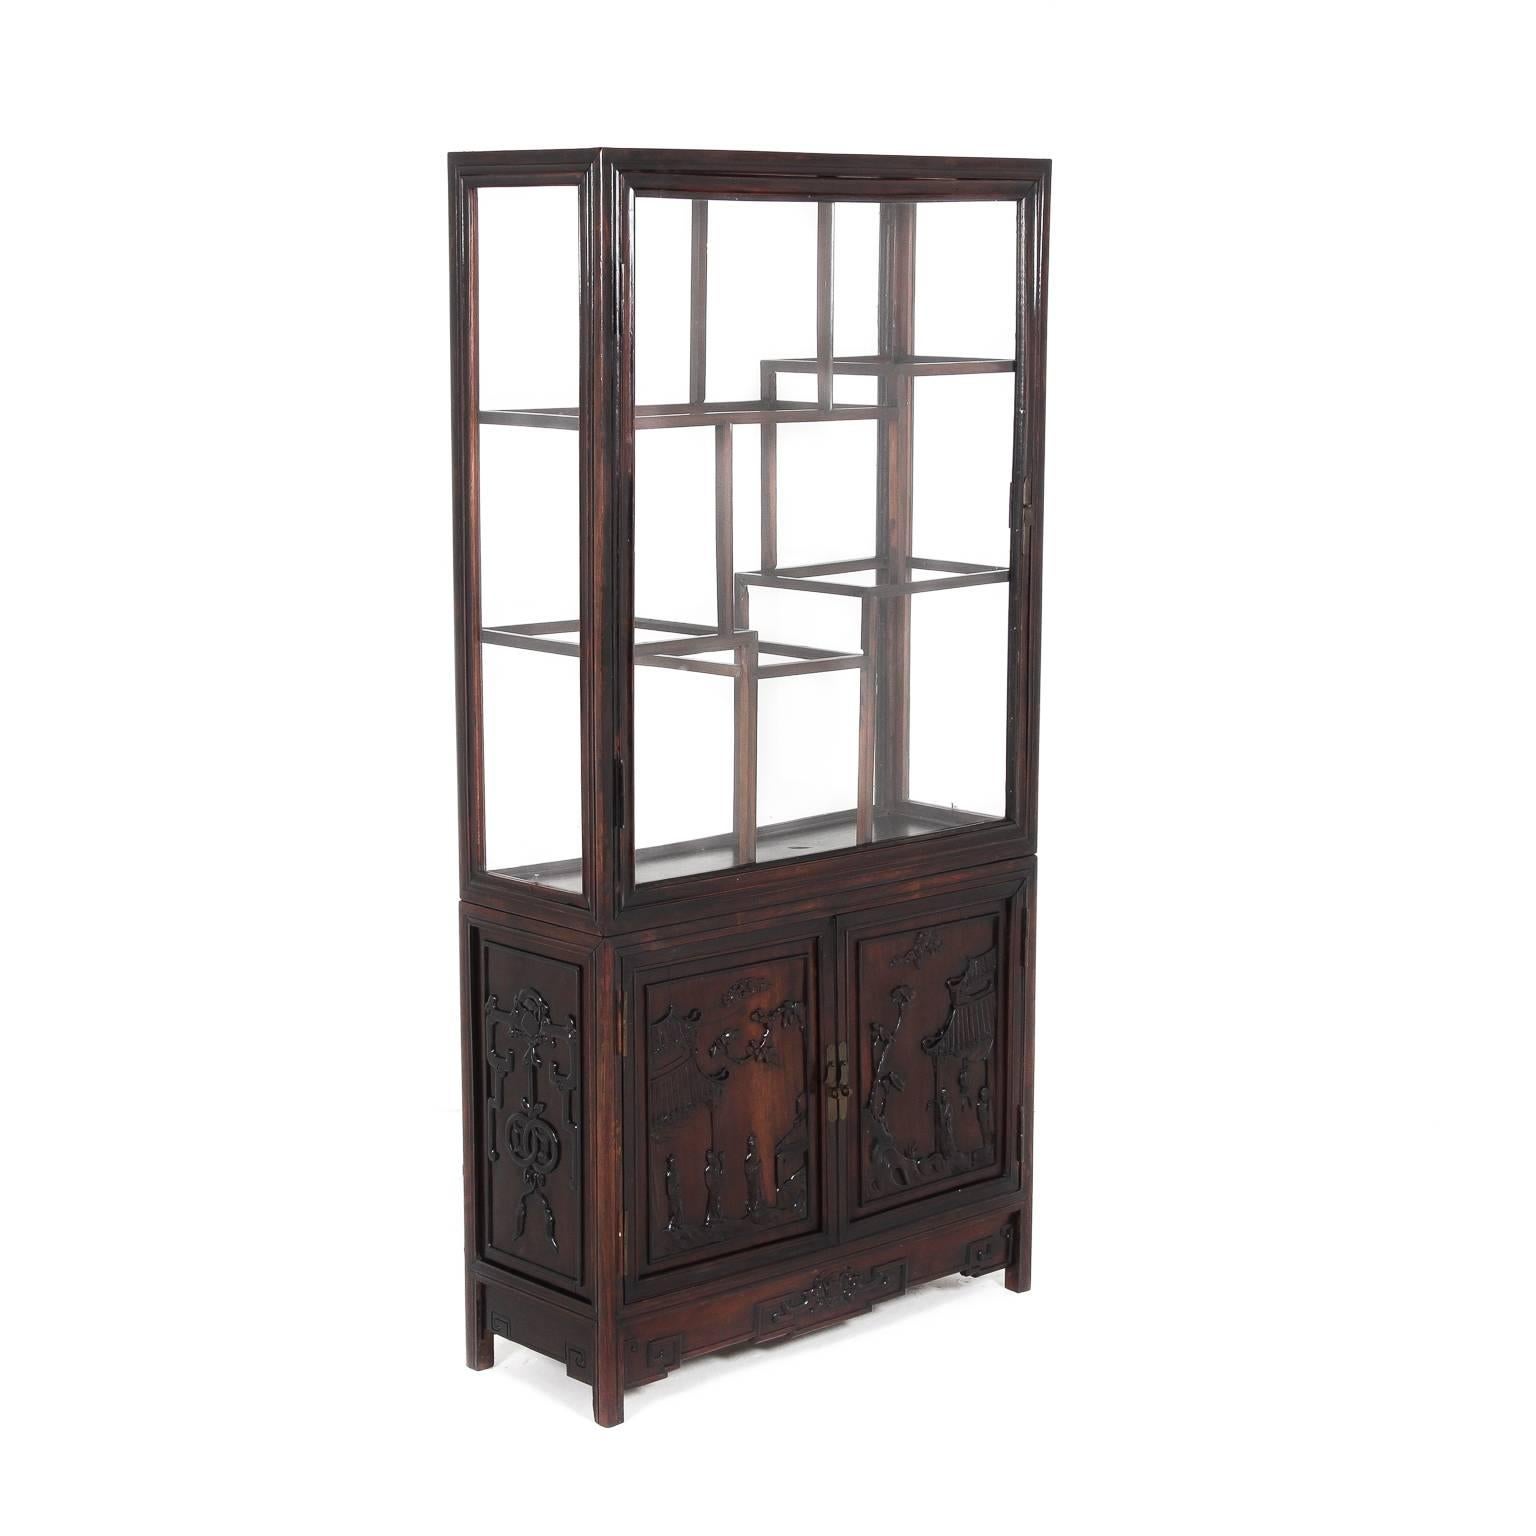 Antique Chinese display cabinet, circa 1900. Cabinet in Hong-Mu wood (or rosewood), with nicely-carved panels. From the late 19th or early 20th century. A shallow depth makes it a versatile piece throughout the home.

Hong-mu is a variety of